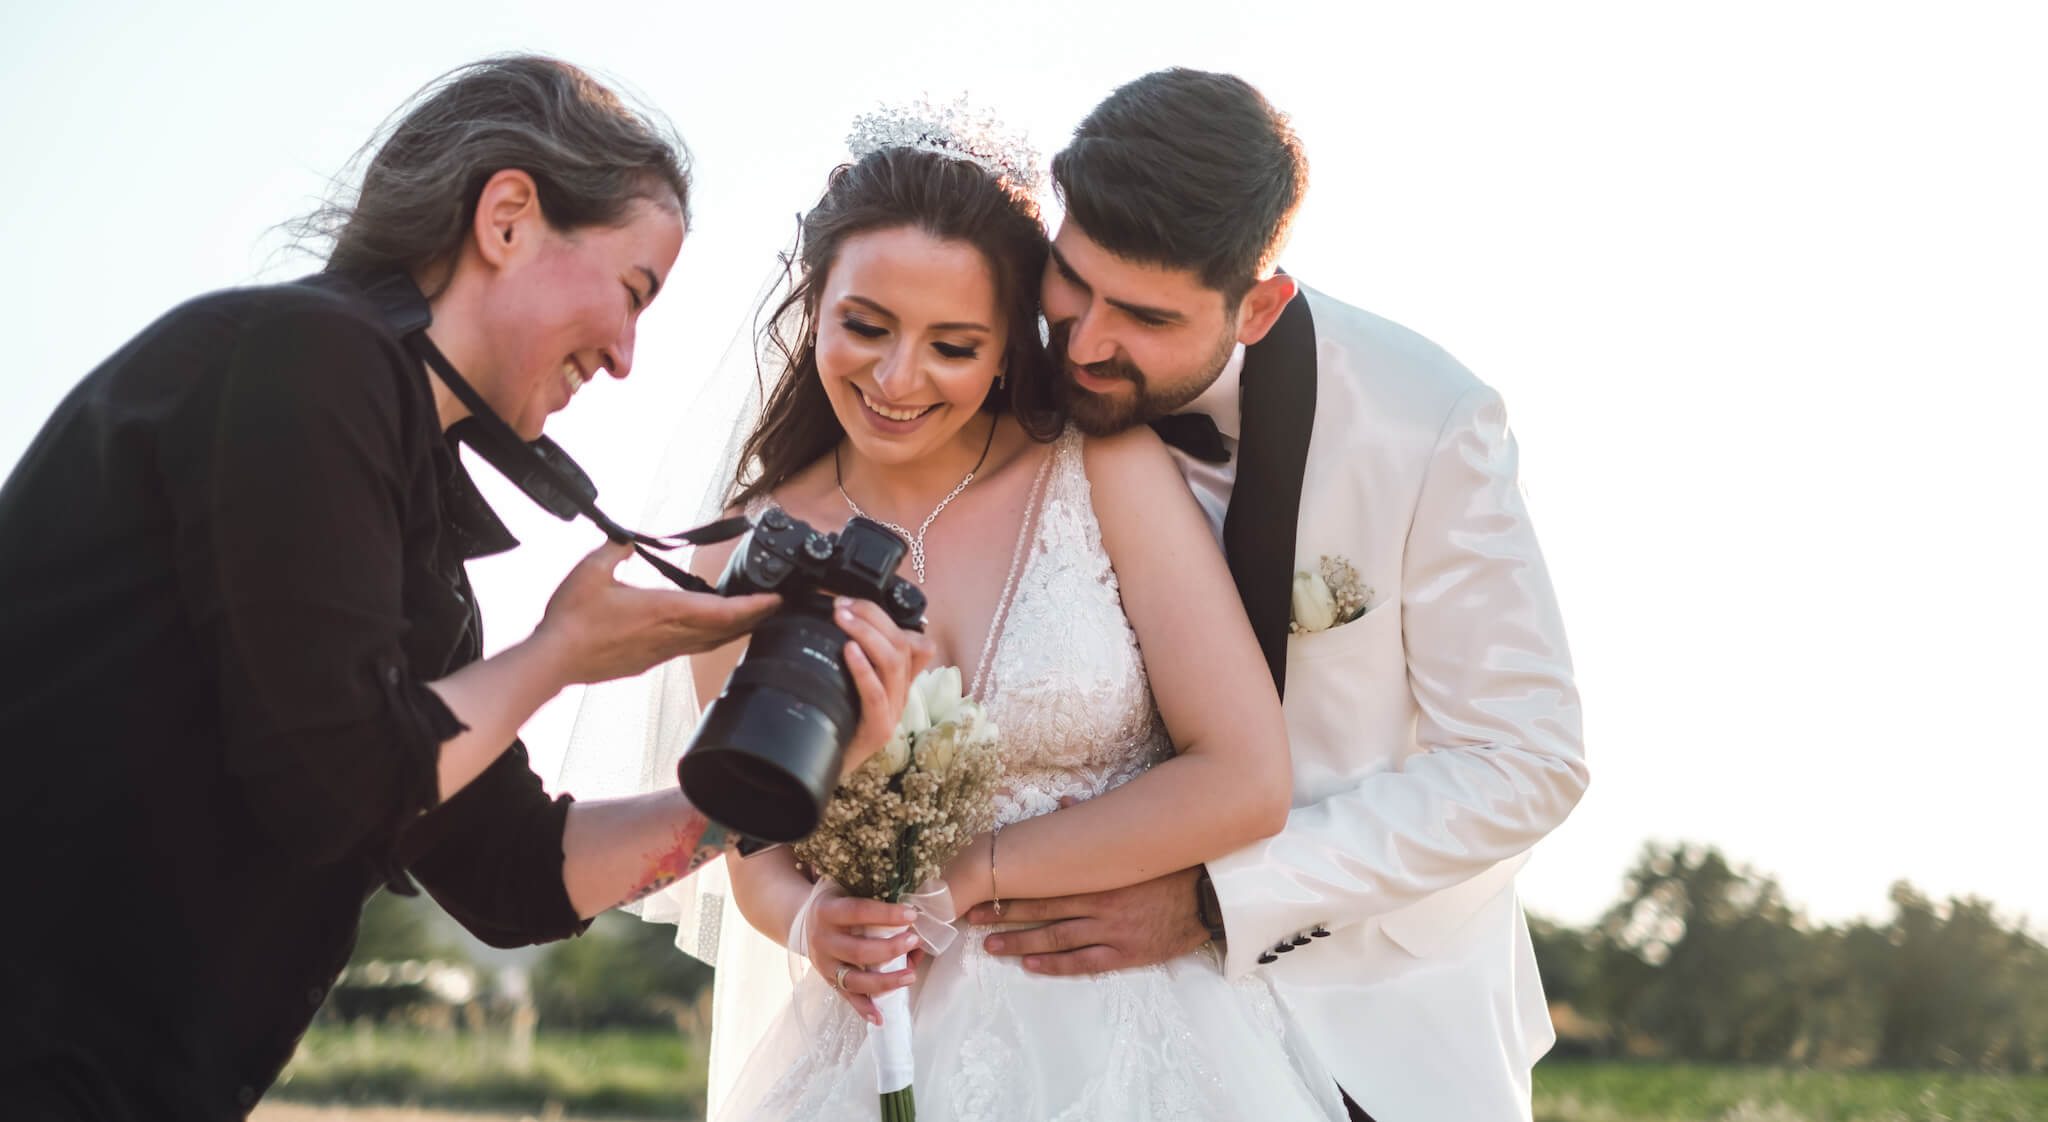 Wedding Photos: Does Your Photographer Own Them? - Rocket Lawyer